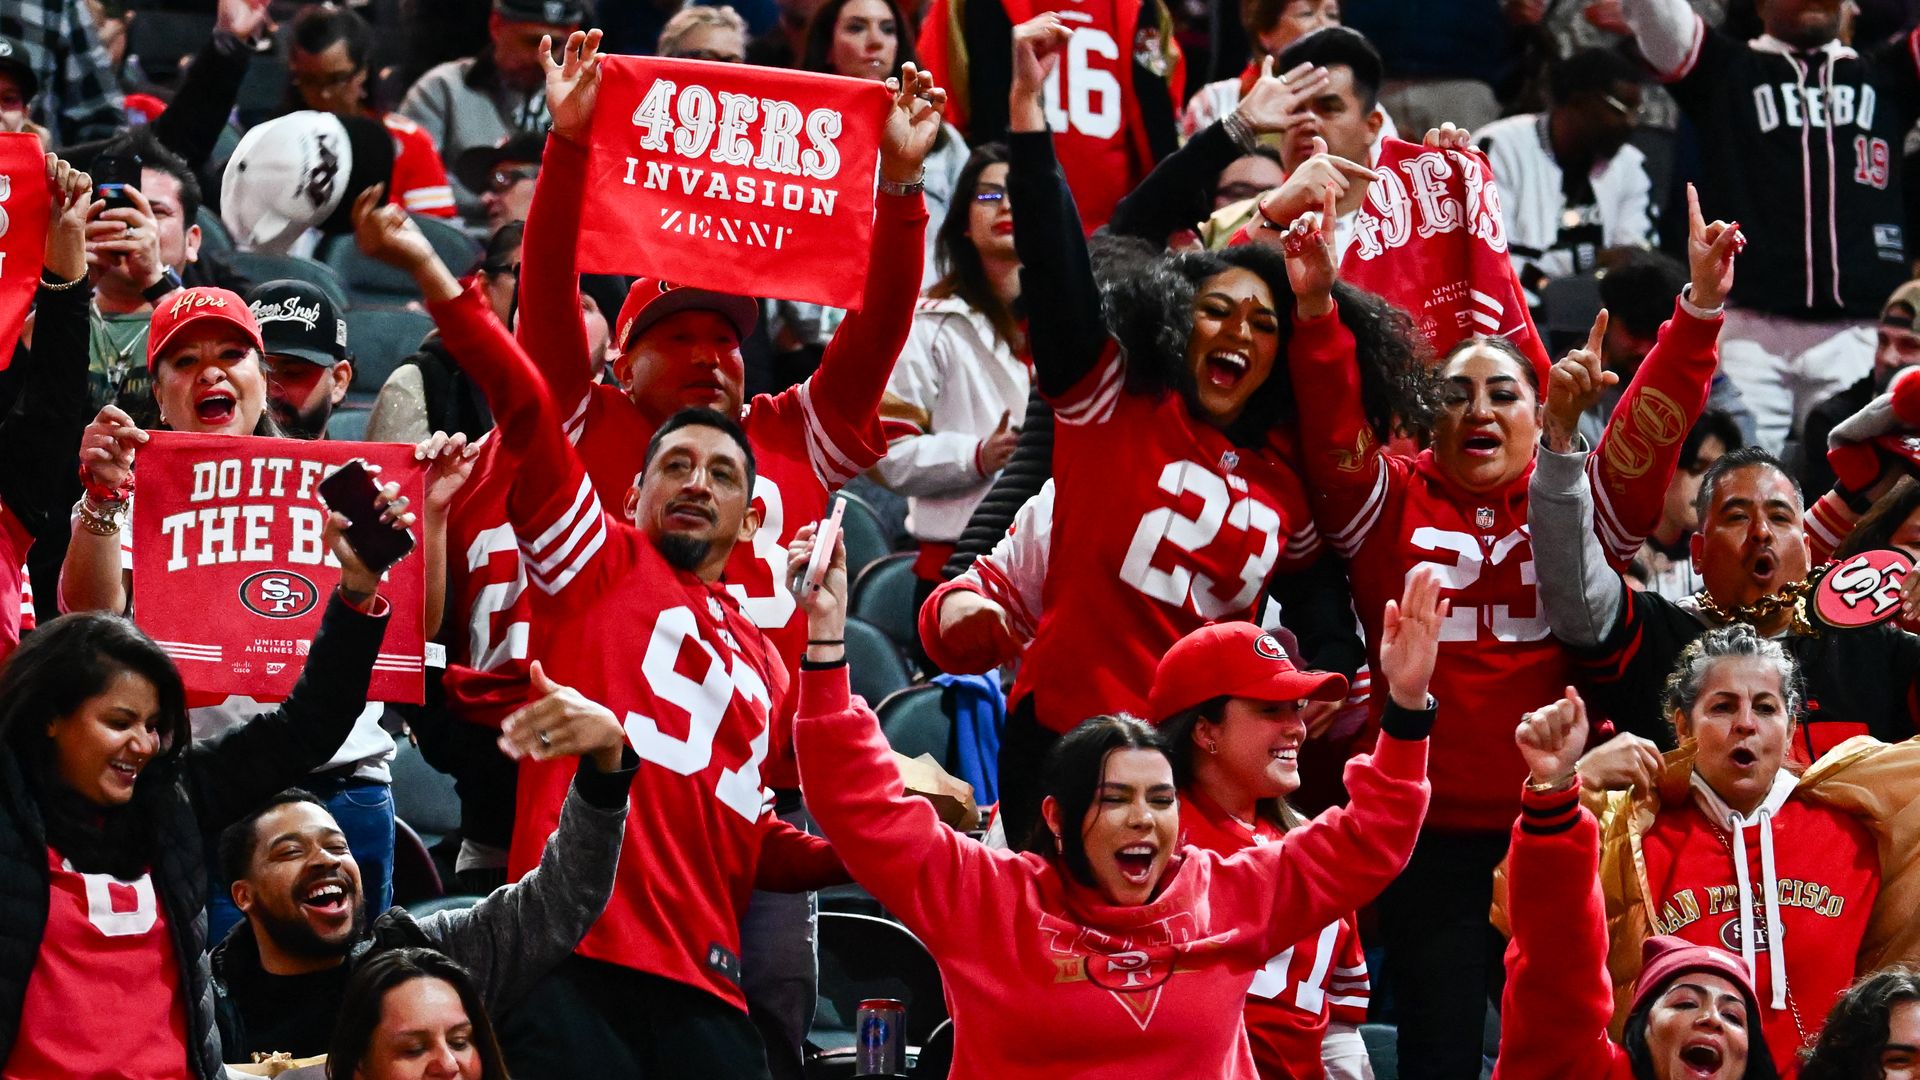 Cheering crowd of Niners fans in Niners gear. One fan holding up sign that says "49ers invasion"